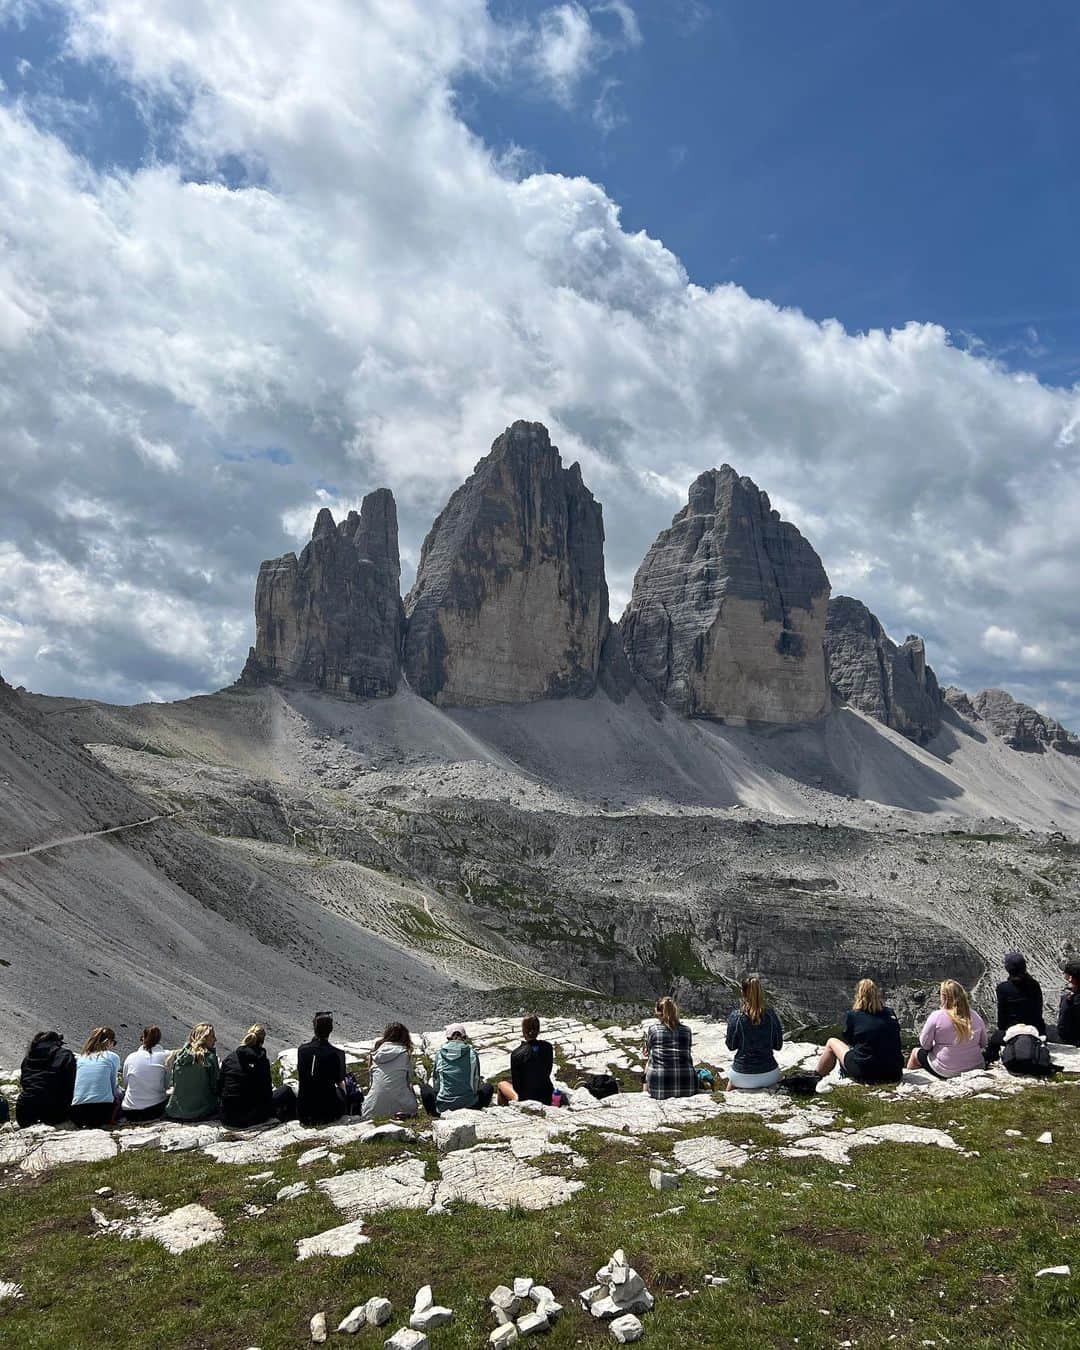 Zanna Van Dijkさんのインスタグラム写真 - (Zanna Van DijkInstagram)「Dolomites group hiking trip dump + TIPS! 🏔️   The most incredible week with the most incredible group of women! It’s been an absolute pleasure to make epic memories together and share our mutual love of the mountains. I’m gonna miss these gals 🥹  1️⃣ Candini di Misurina viewpoint - my favourite view in the Dolomites! 😍 2️⃣ @staywildswim ladies swimming in Lago Federa, the warmest lake we dipped in with plenty of rocks to jump in from 🏊‍♀️  3️⃣ The Lago Federa loop hike. Make sure you walk it counter clockwise for the best scenery 👌🏼  4️⃣ Hiking through the valleys of Parco Naturale Delle Dolomiti d’Ampezzo, a gem of a trail without the crowds 🌲  5️⃣ Lago di Braies. The most stunning turquoise blue lake, make sure you get there early as it’s super popular ✨  6️⃣ One foot in Austria, one foot in Italy at the summit of Mount Elmo. This place has the most epic 360 views 🇦🇹🇮🇹  7️⃣ There’s always time for a post-hike Aperol - they’re so cheap here it would be a crime not to! 🥂  8️⃣ A picnic with a view of Tre Cime, the most iconic mountains in the region 🧺  9️⃣ Dodging thunderstorms as we explore Cinque Torri. Make sure you hike up to Rifugio Nuvolau for a hot chocolate ⛈️  🔟 Swimming in Dürrensee. My personal favourite view that we swam with 🤩  If you want to join me on my next group hiking trip, there’s spaces on my October adventure to mountains in Turkey! All the info is on my website 🫶🏼   Dolomites travel guides incoming! ♥️ #thedolomites #grouphiking #hikinggroup」7月22日 18時03分 - zannavandijk